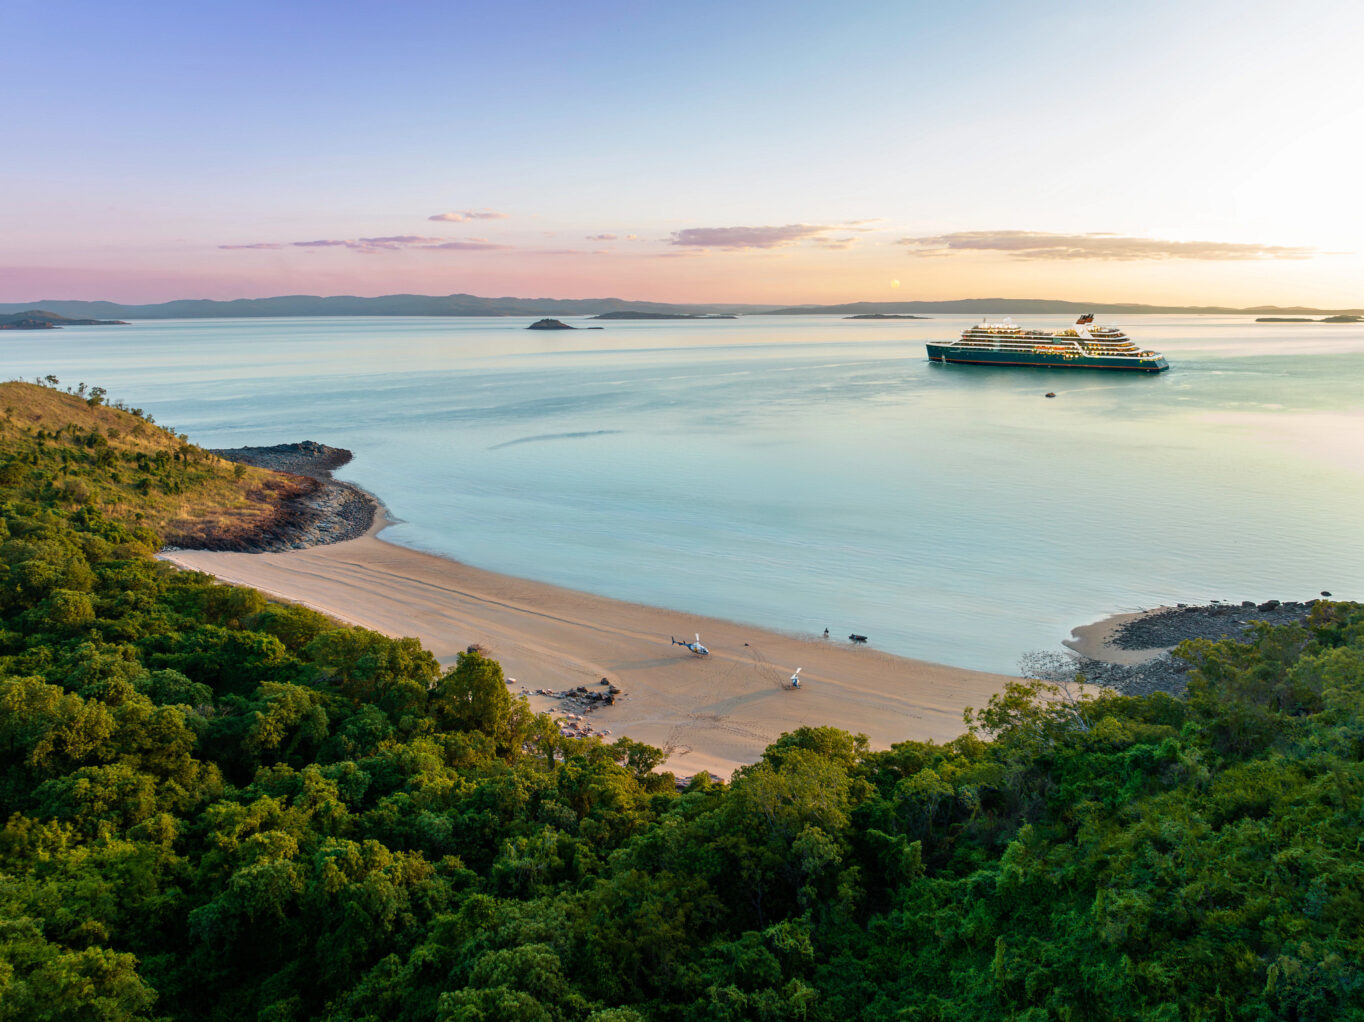 Seabourn Pursuit in the Kimberley sailing on the water Traditional Owners